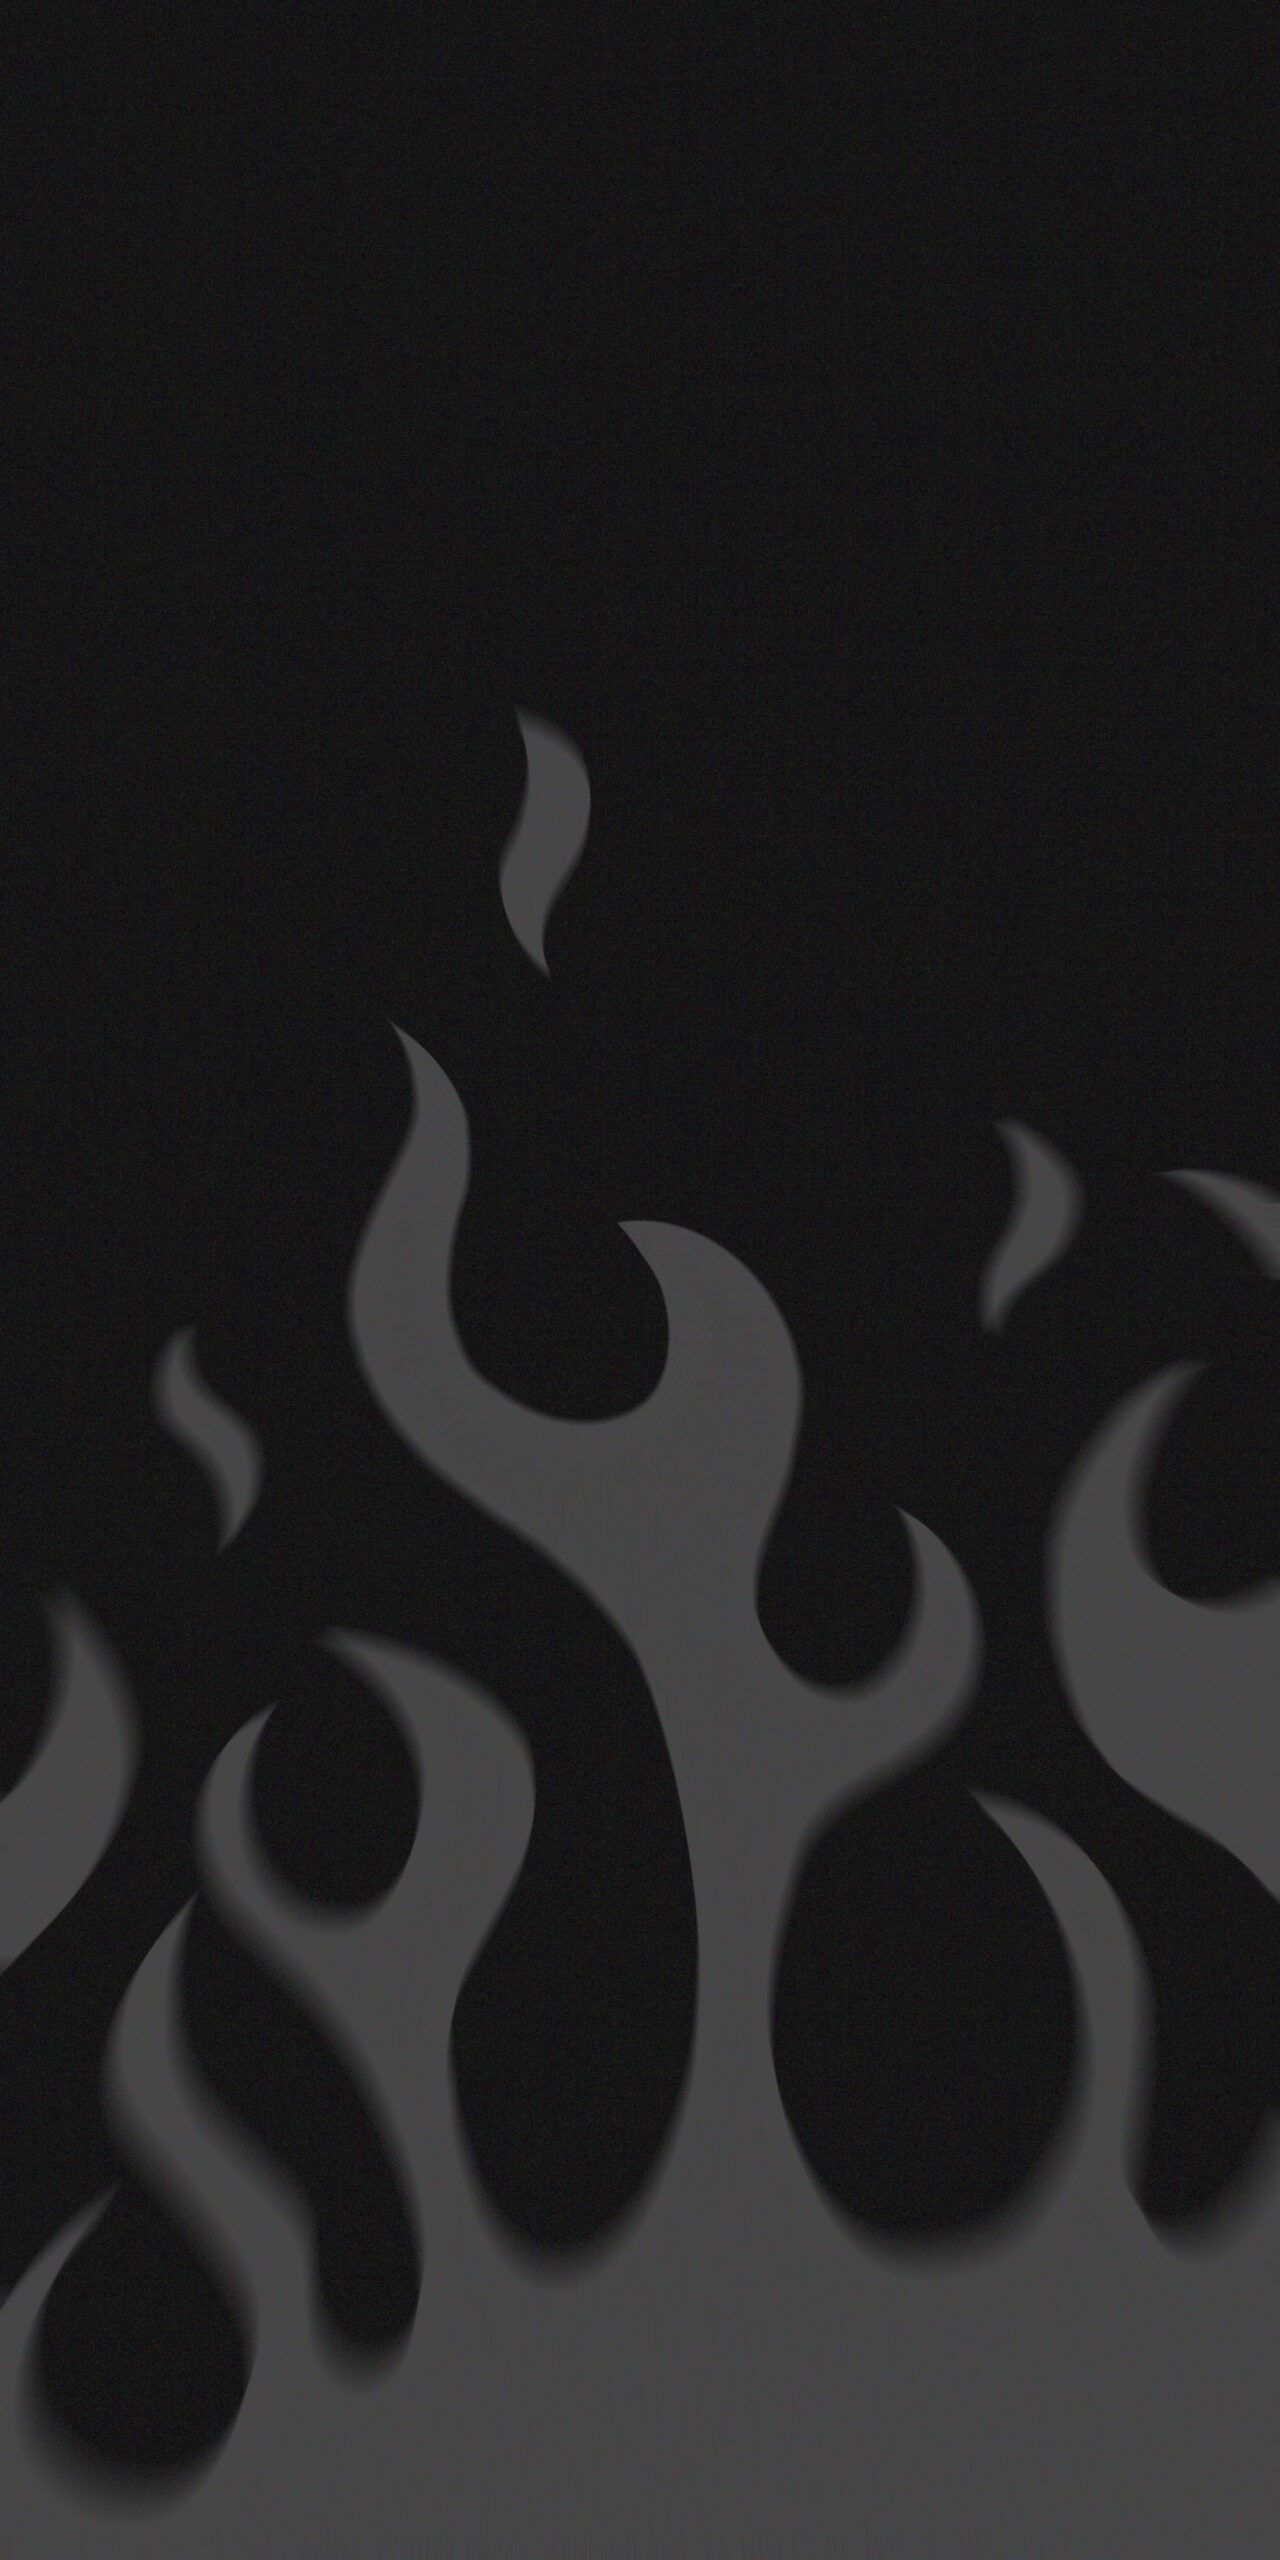 A black background with flames on it - Fire, flames